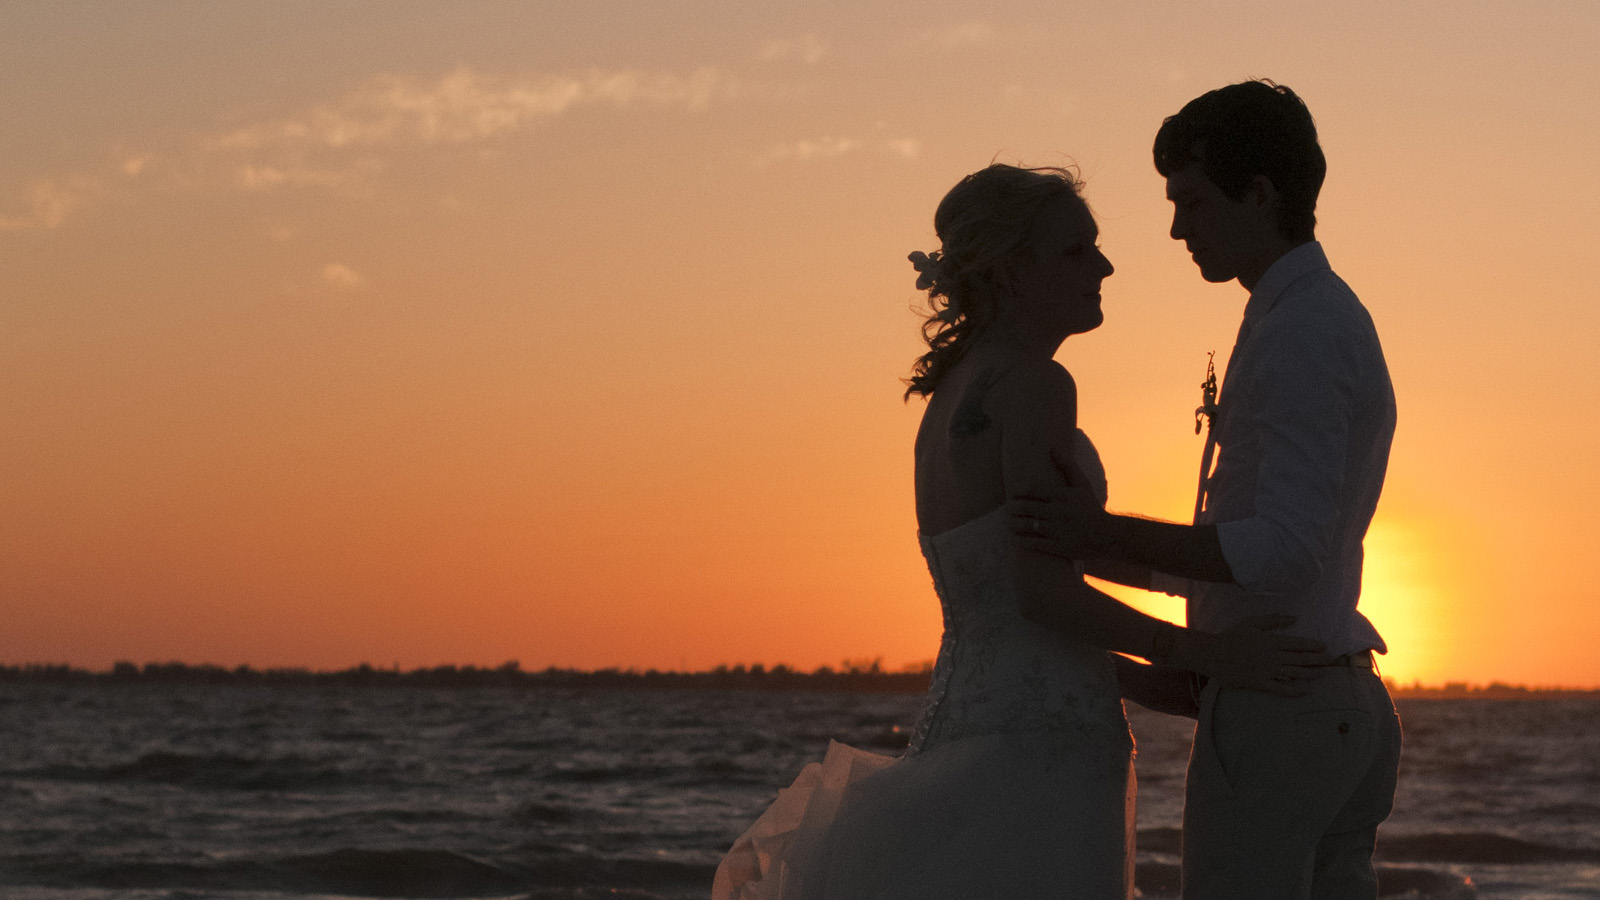 Destination Wedding Photography Packages